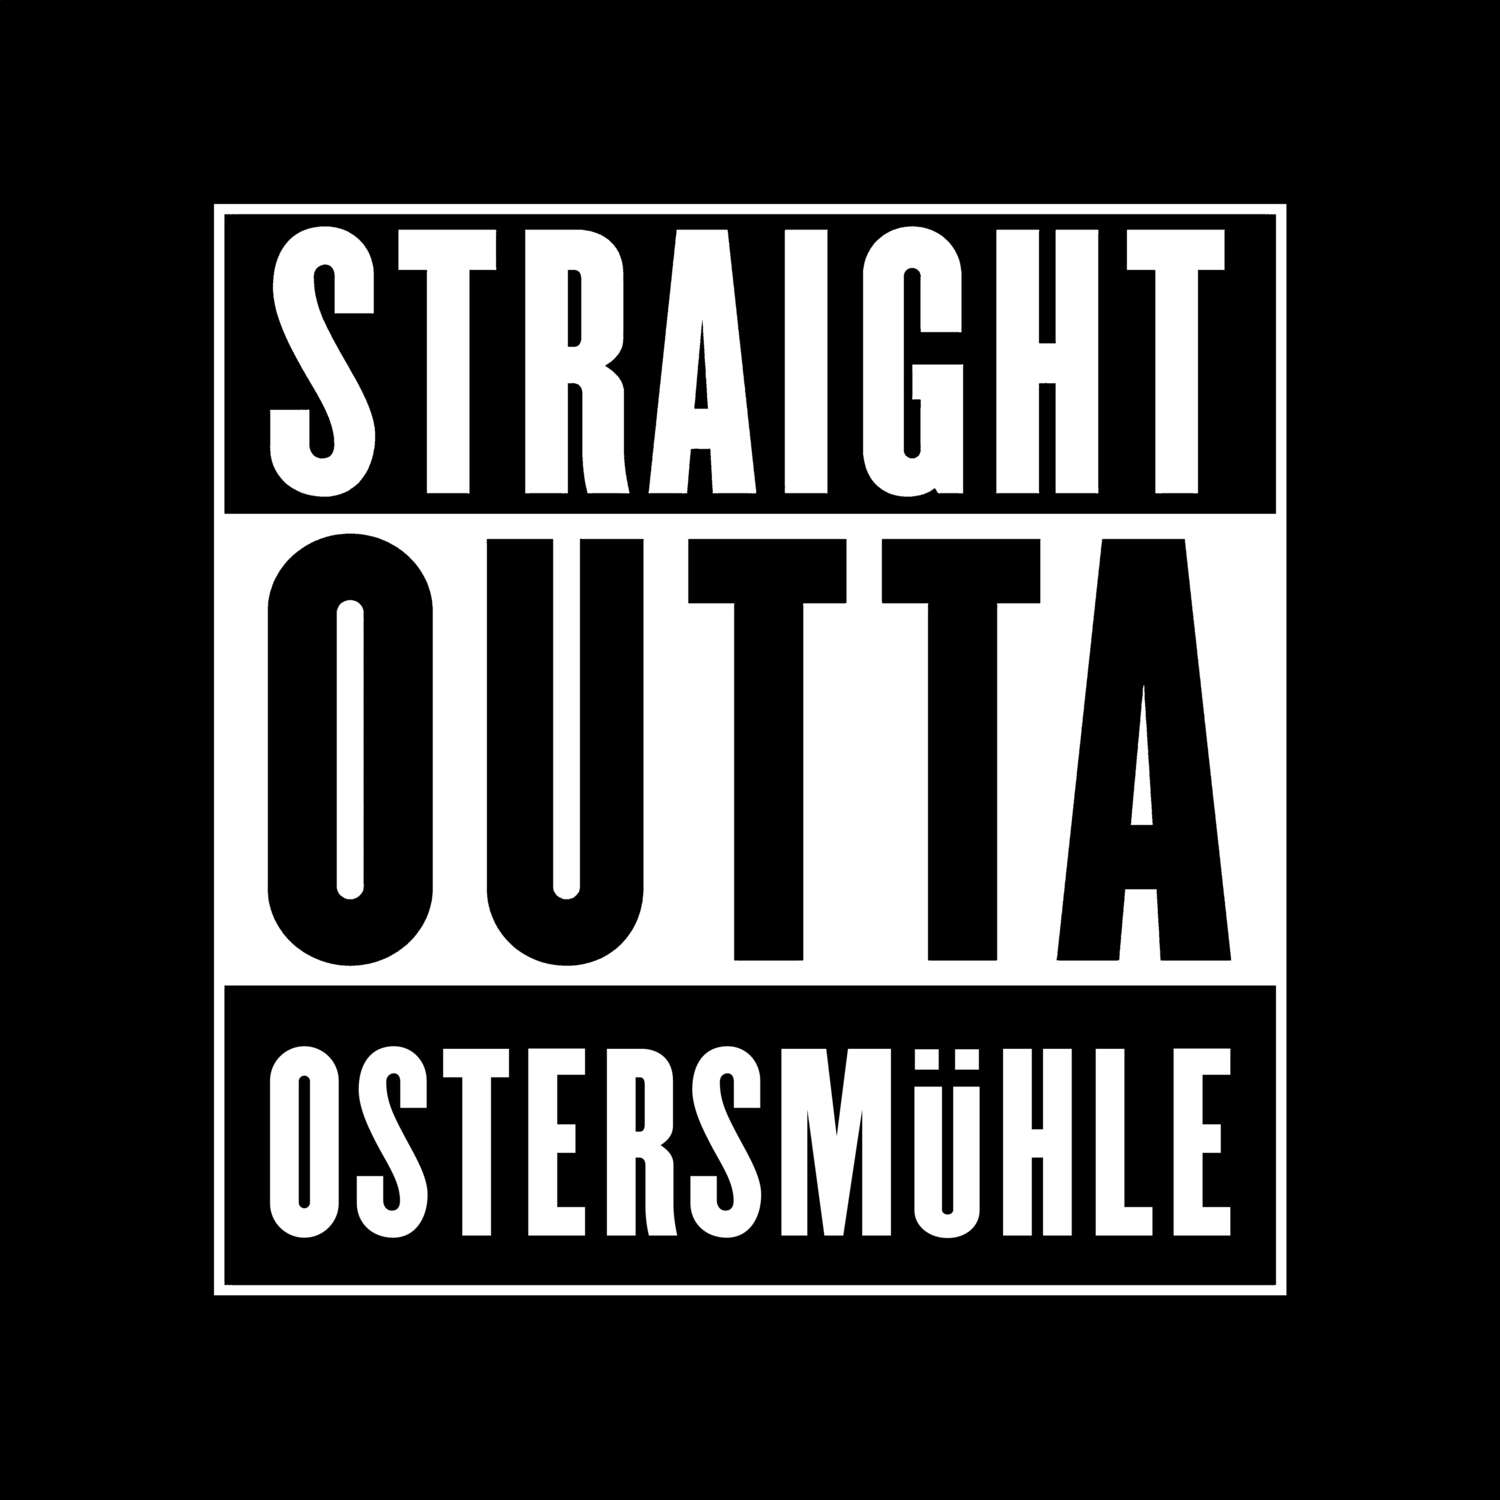 Ostersmühle T-Shirt »Straight Outta«